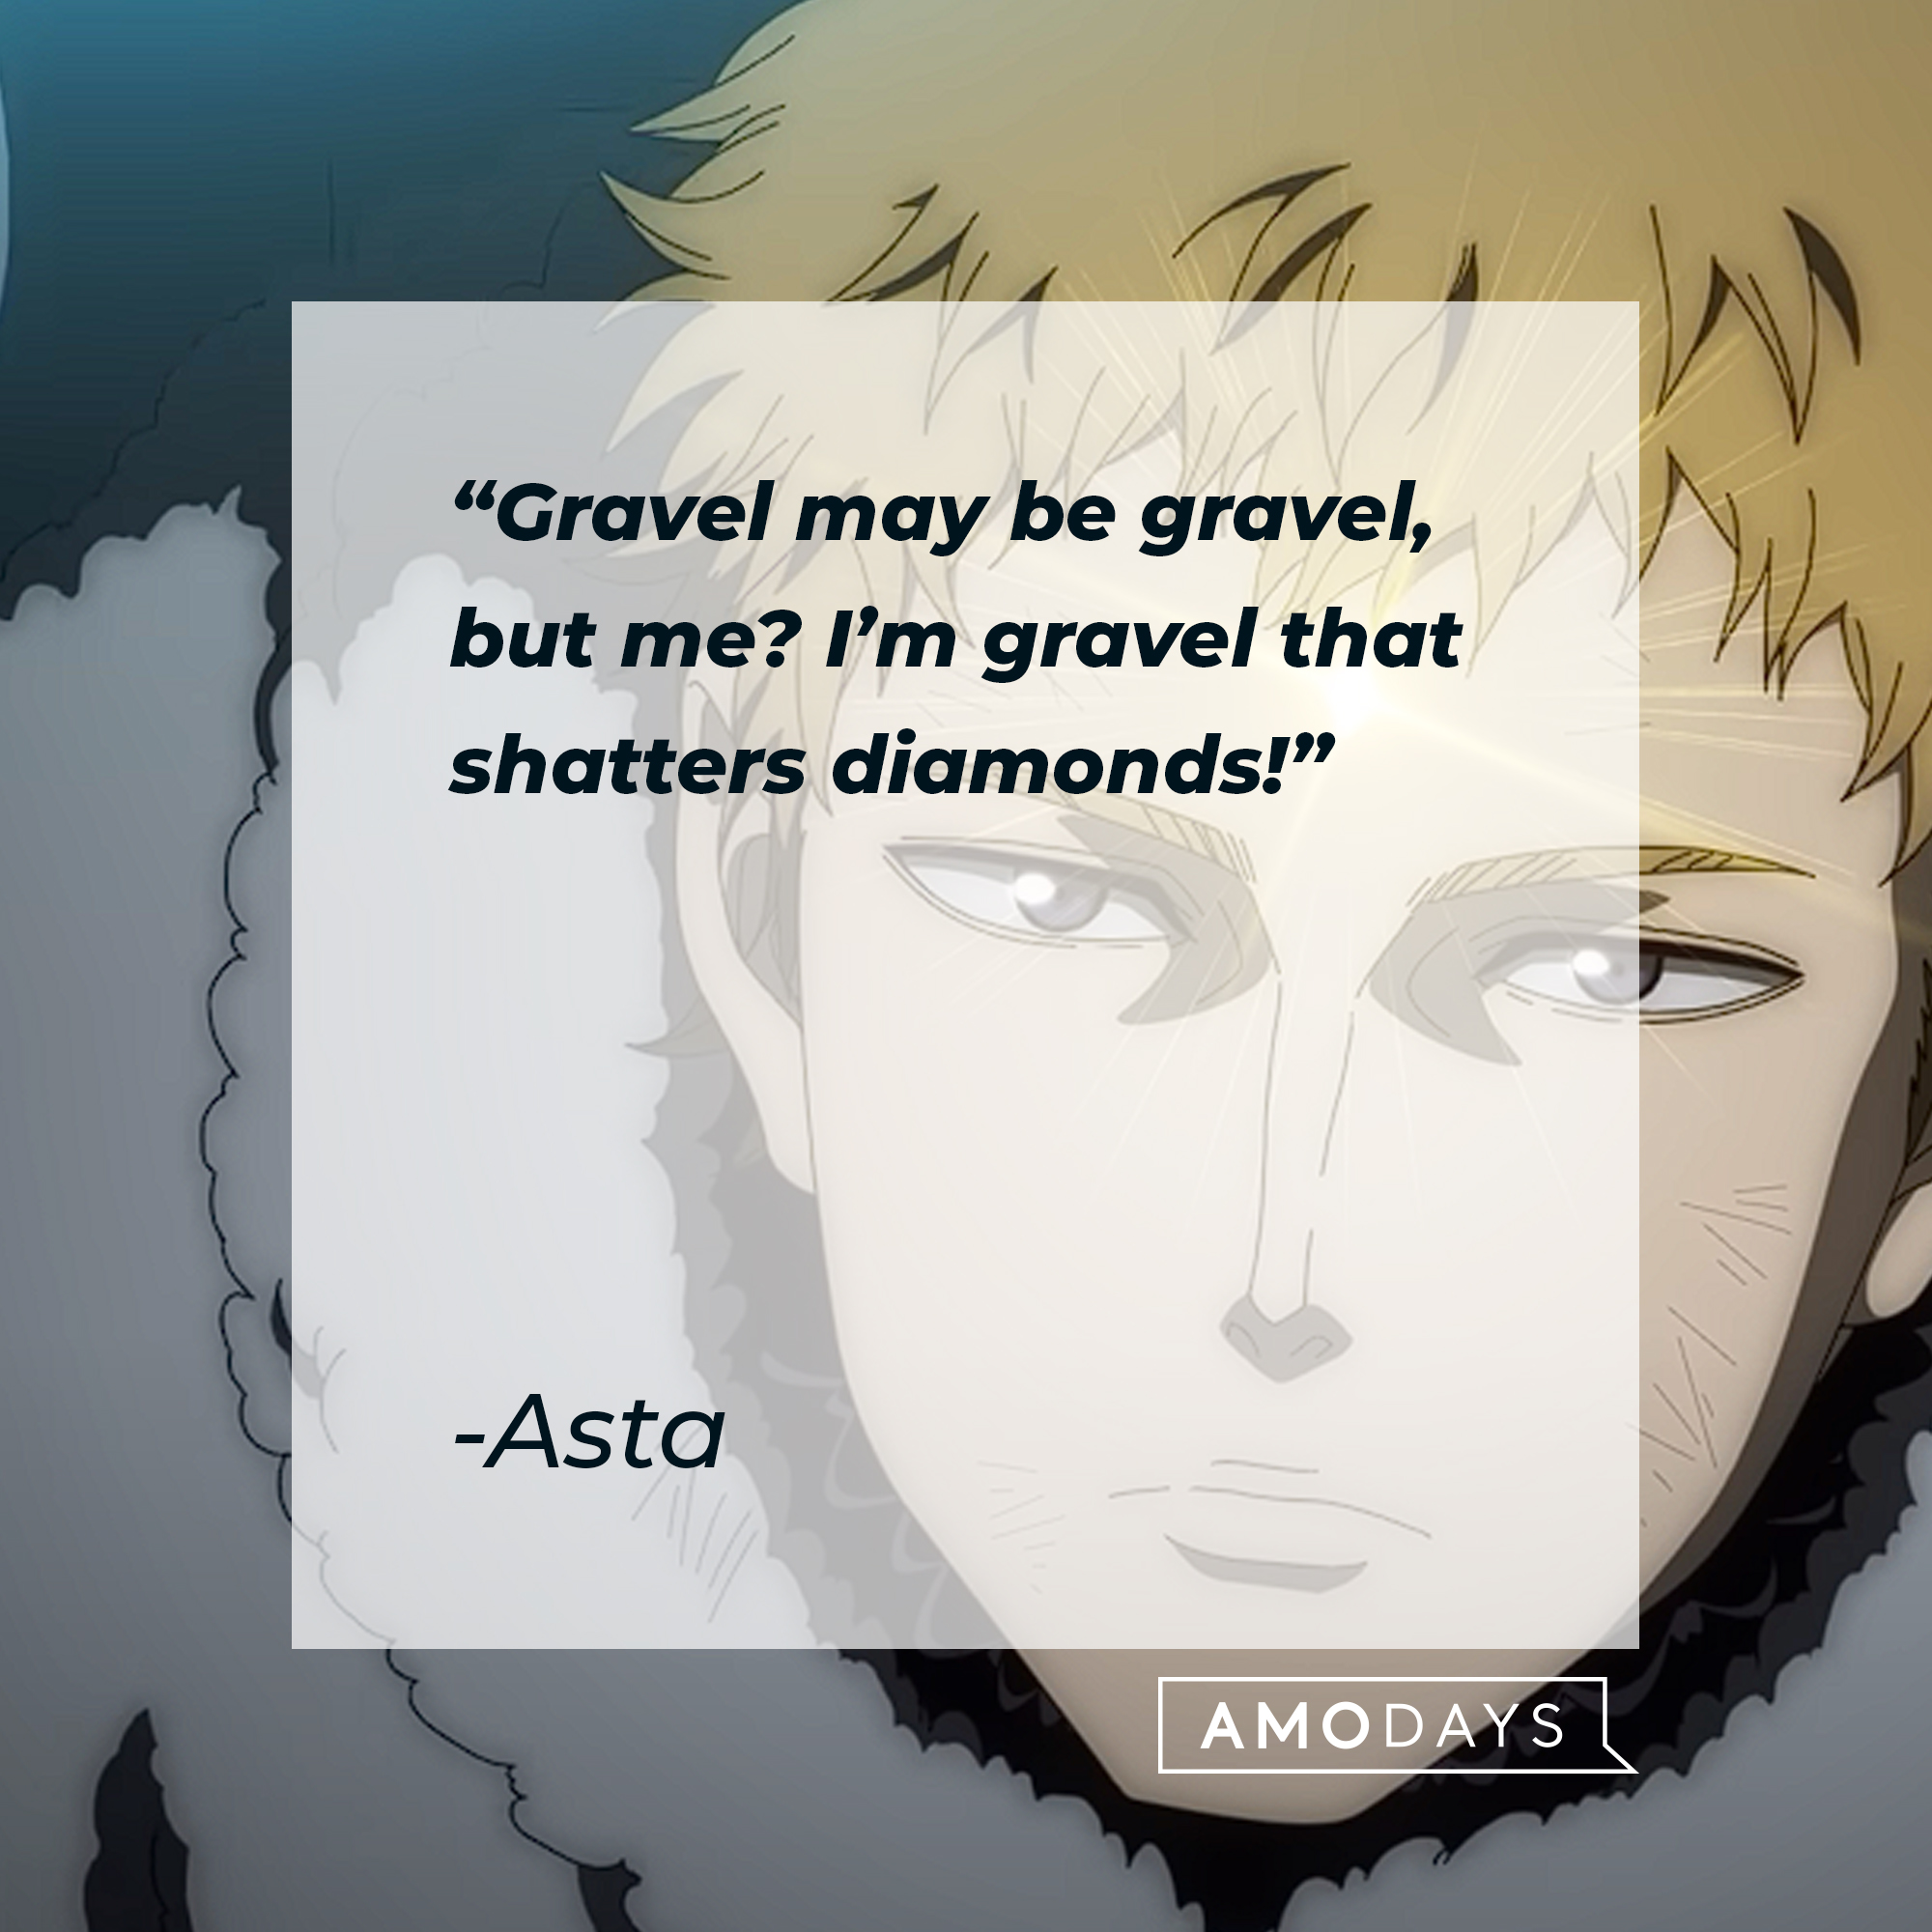 An image of Asta with his quote: “Gravel may be gravel, but me? I’m gravel that shatters diamonds!” | Source: youtube/netflixanime